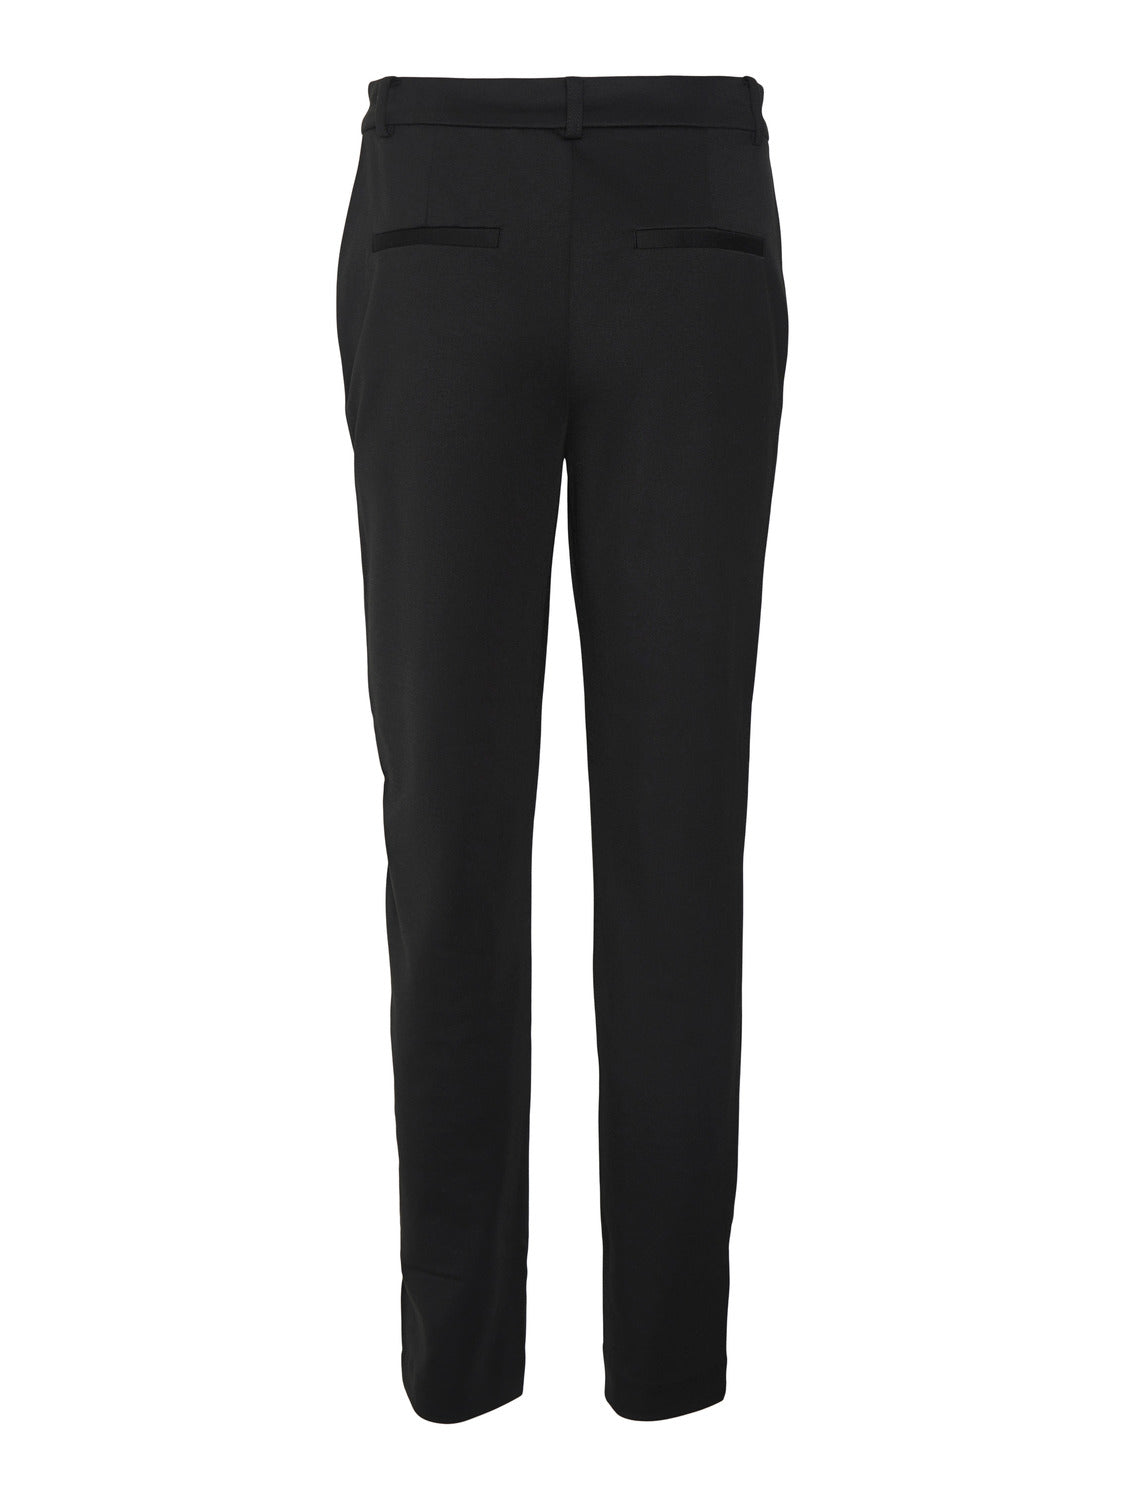 VMLUCCALILITH Pants - Black